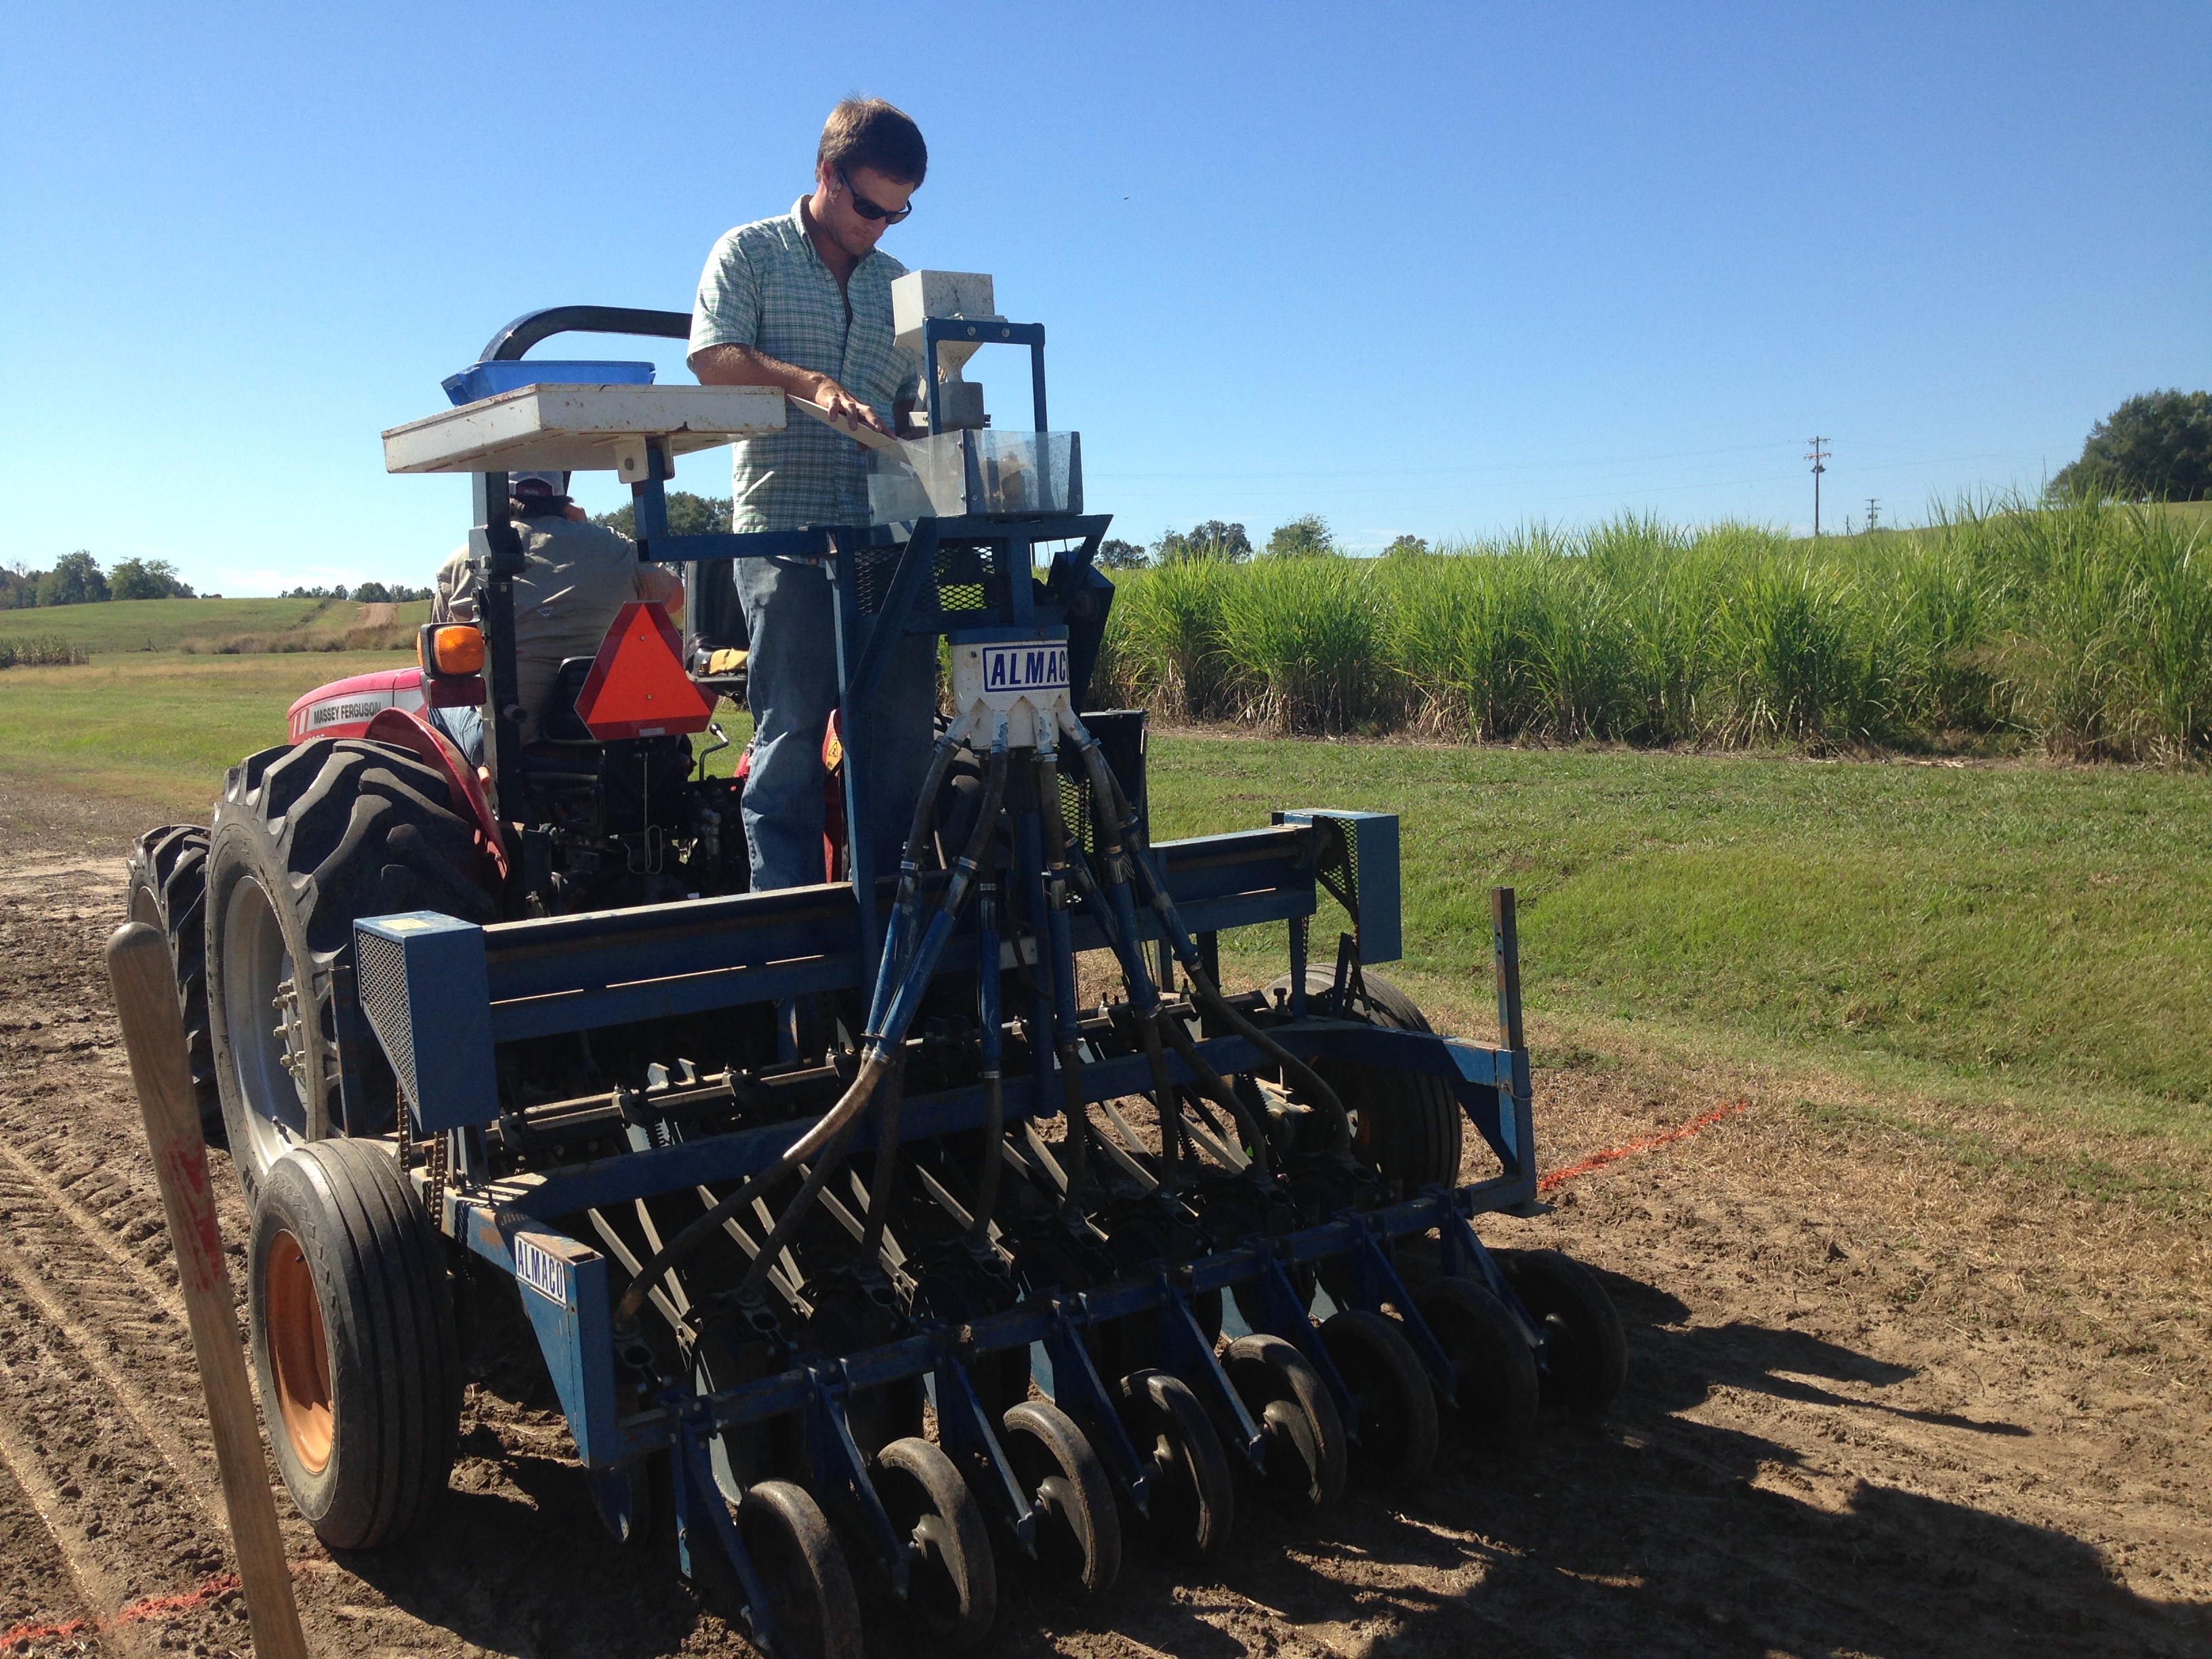 Richwine operates an Almaco 8-row plot drill being pulled behind a tractor to plant each plot.